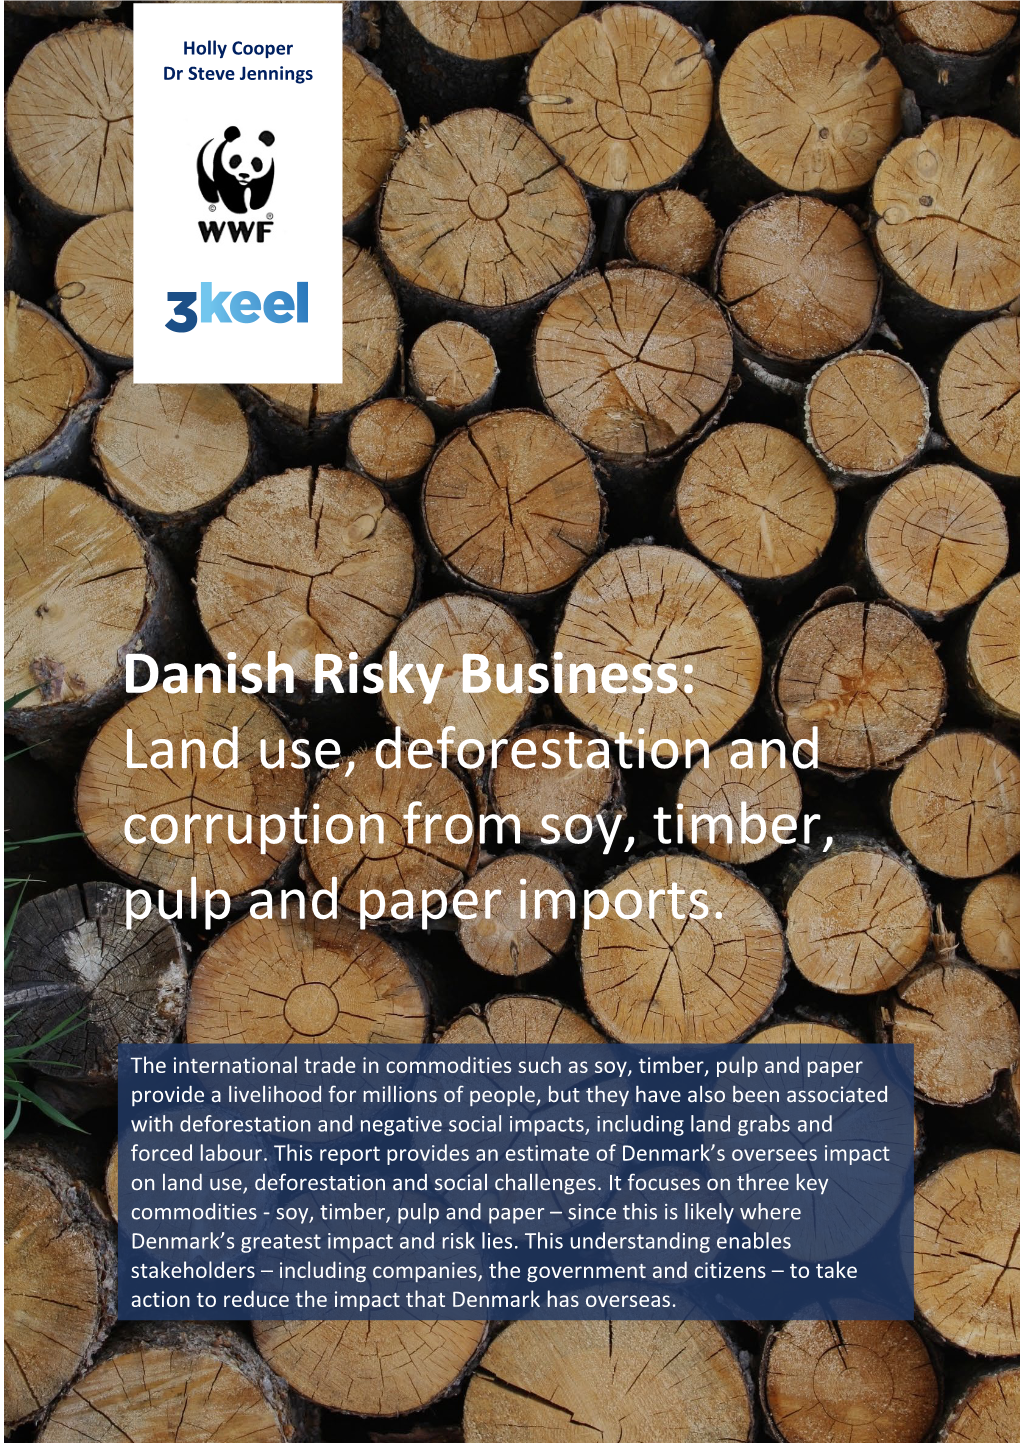 Danish Risky Business: Land Use, Deforestation and Corruption from Soy, Timber, Pulp and Paper Imports